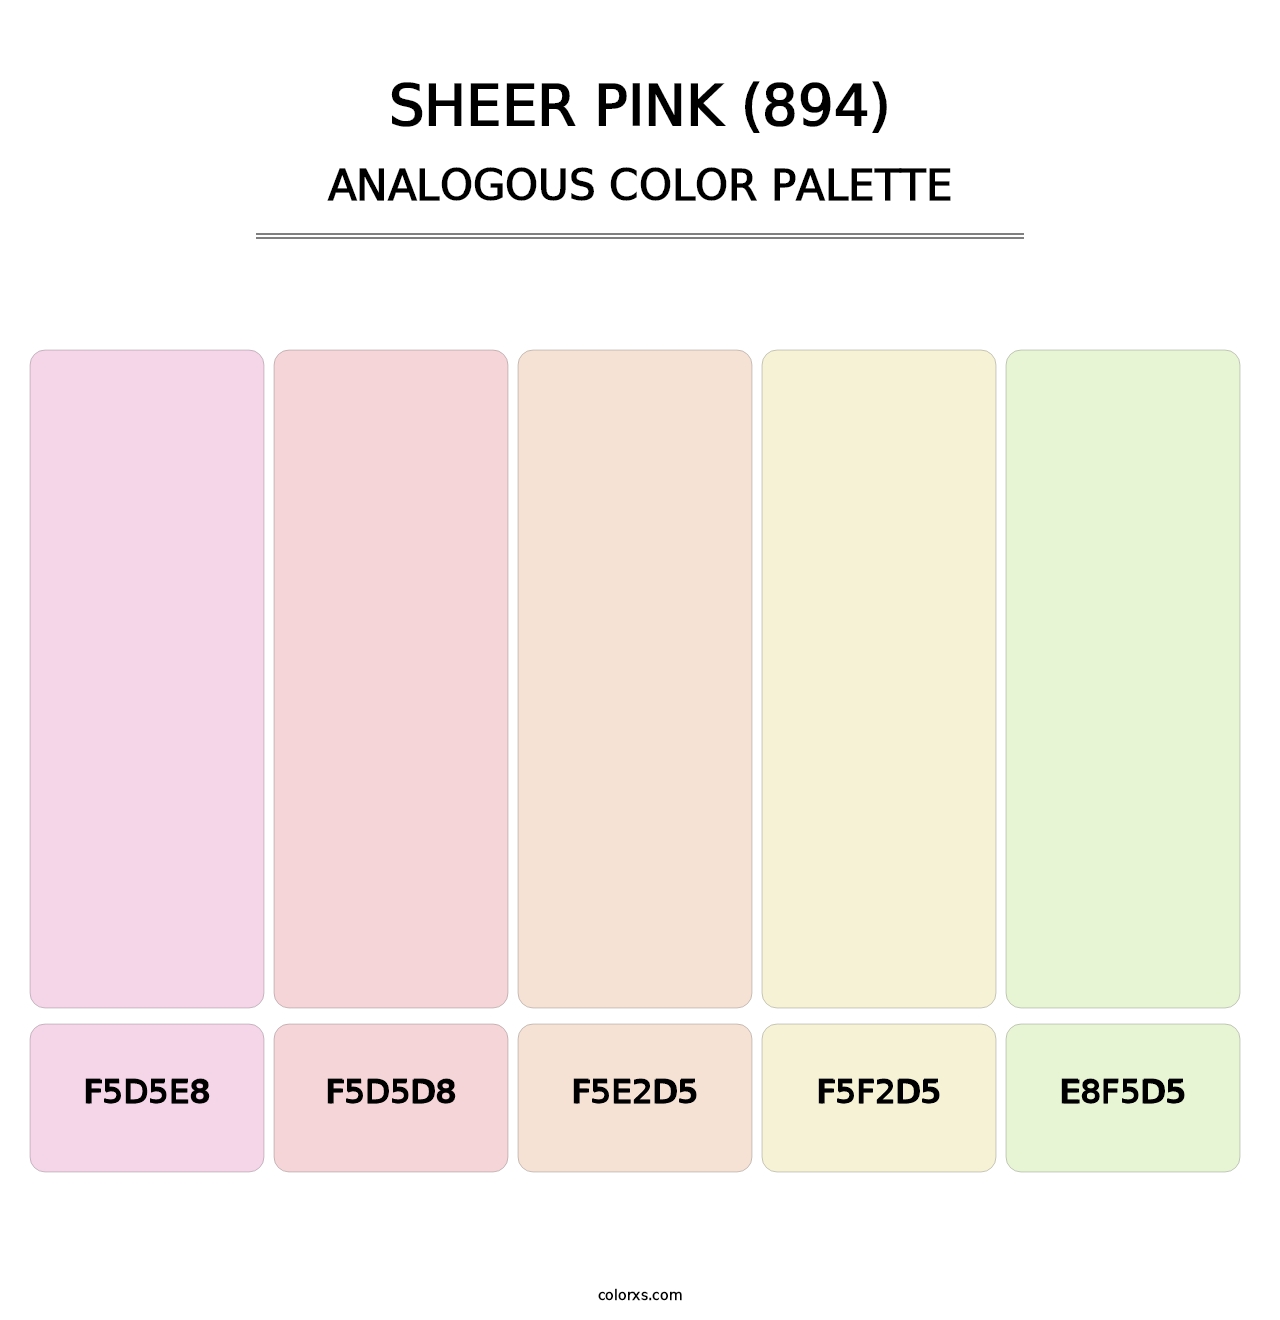 Sheer Pink (894) - Analogous Color Palette